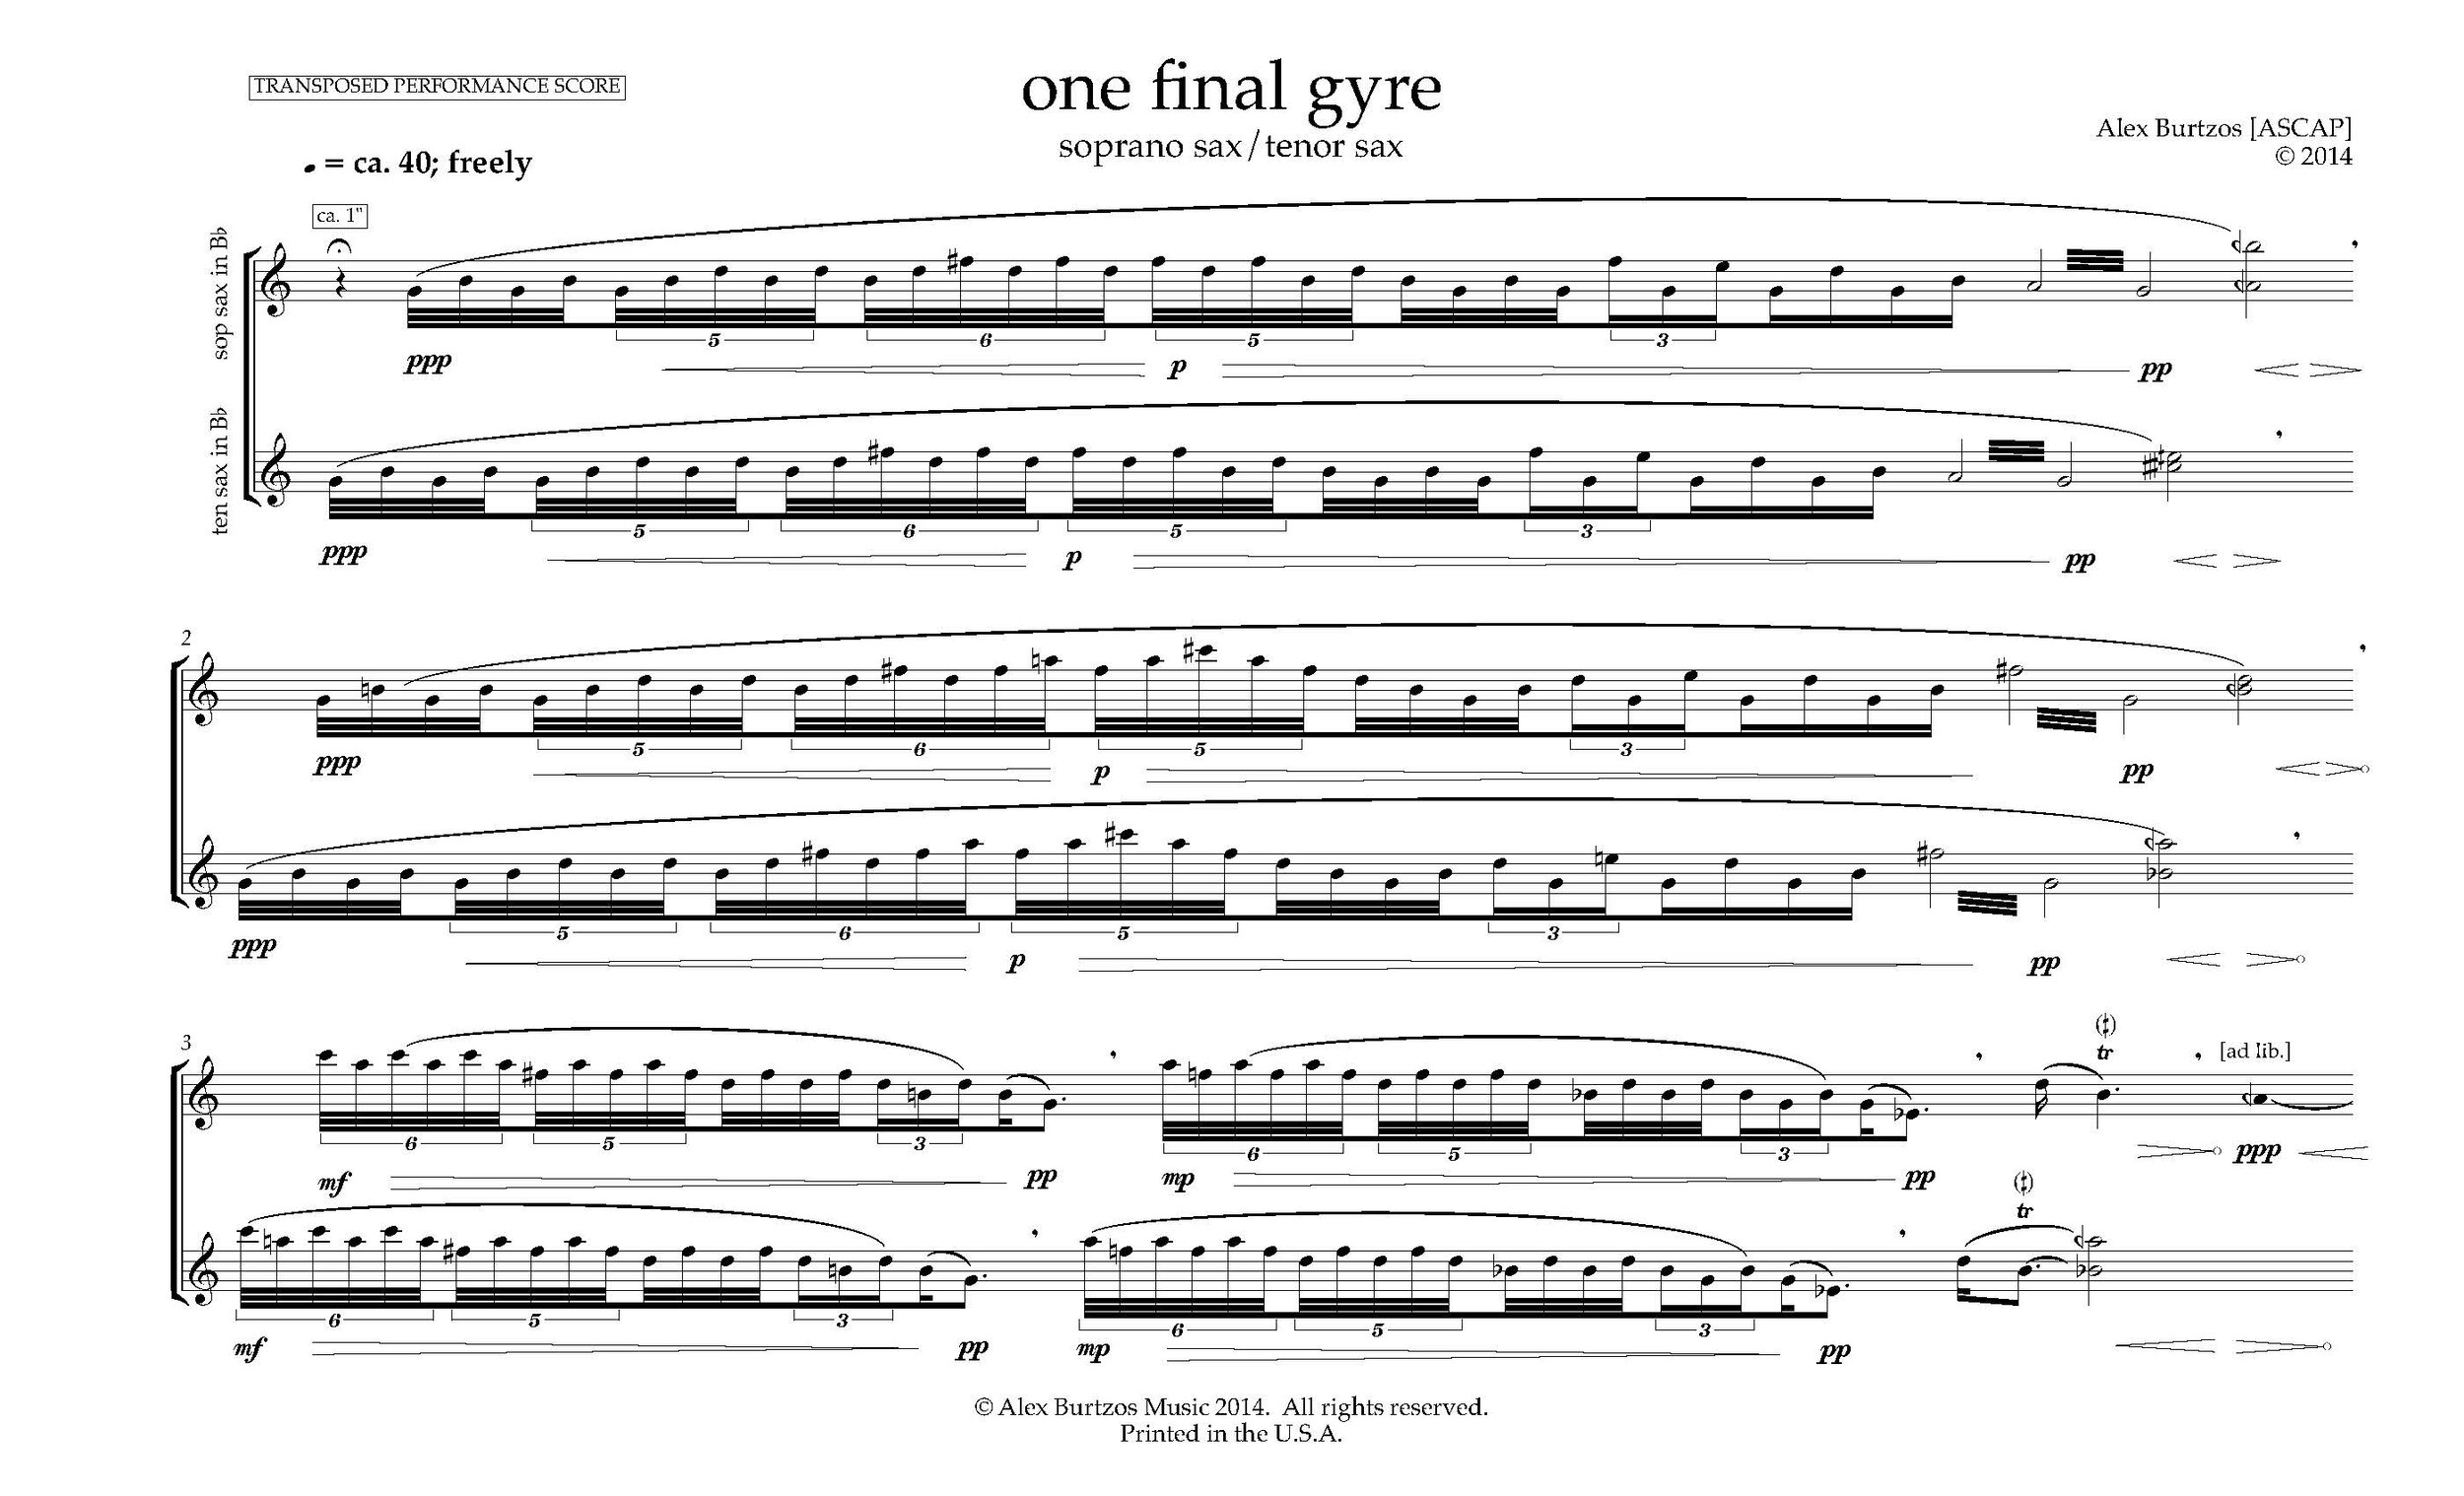 One Final Gyre - Complete Score_Page_09.jpg